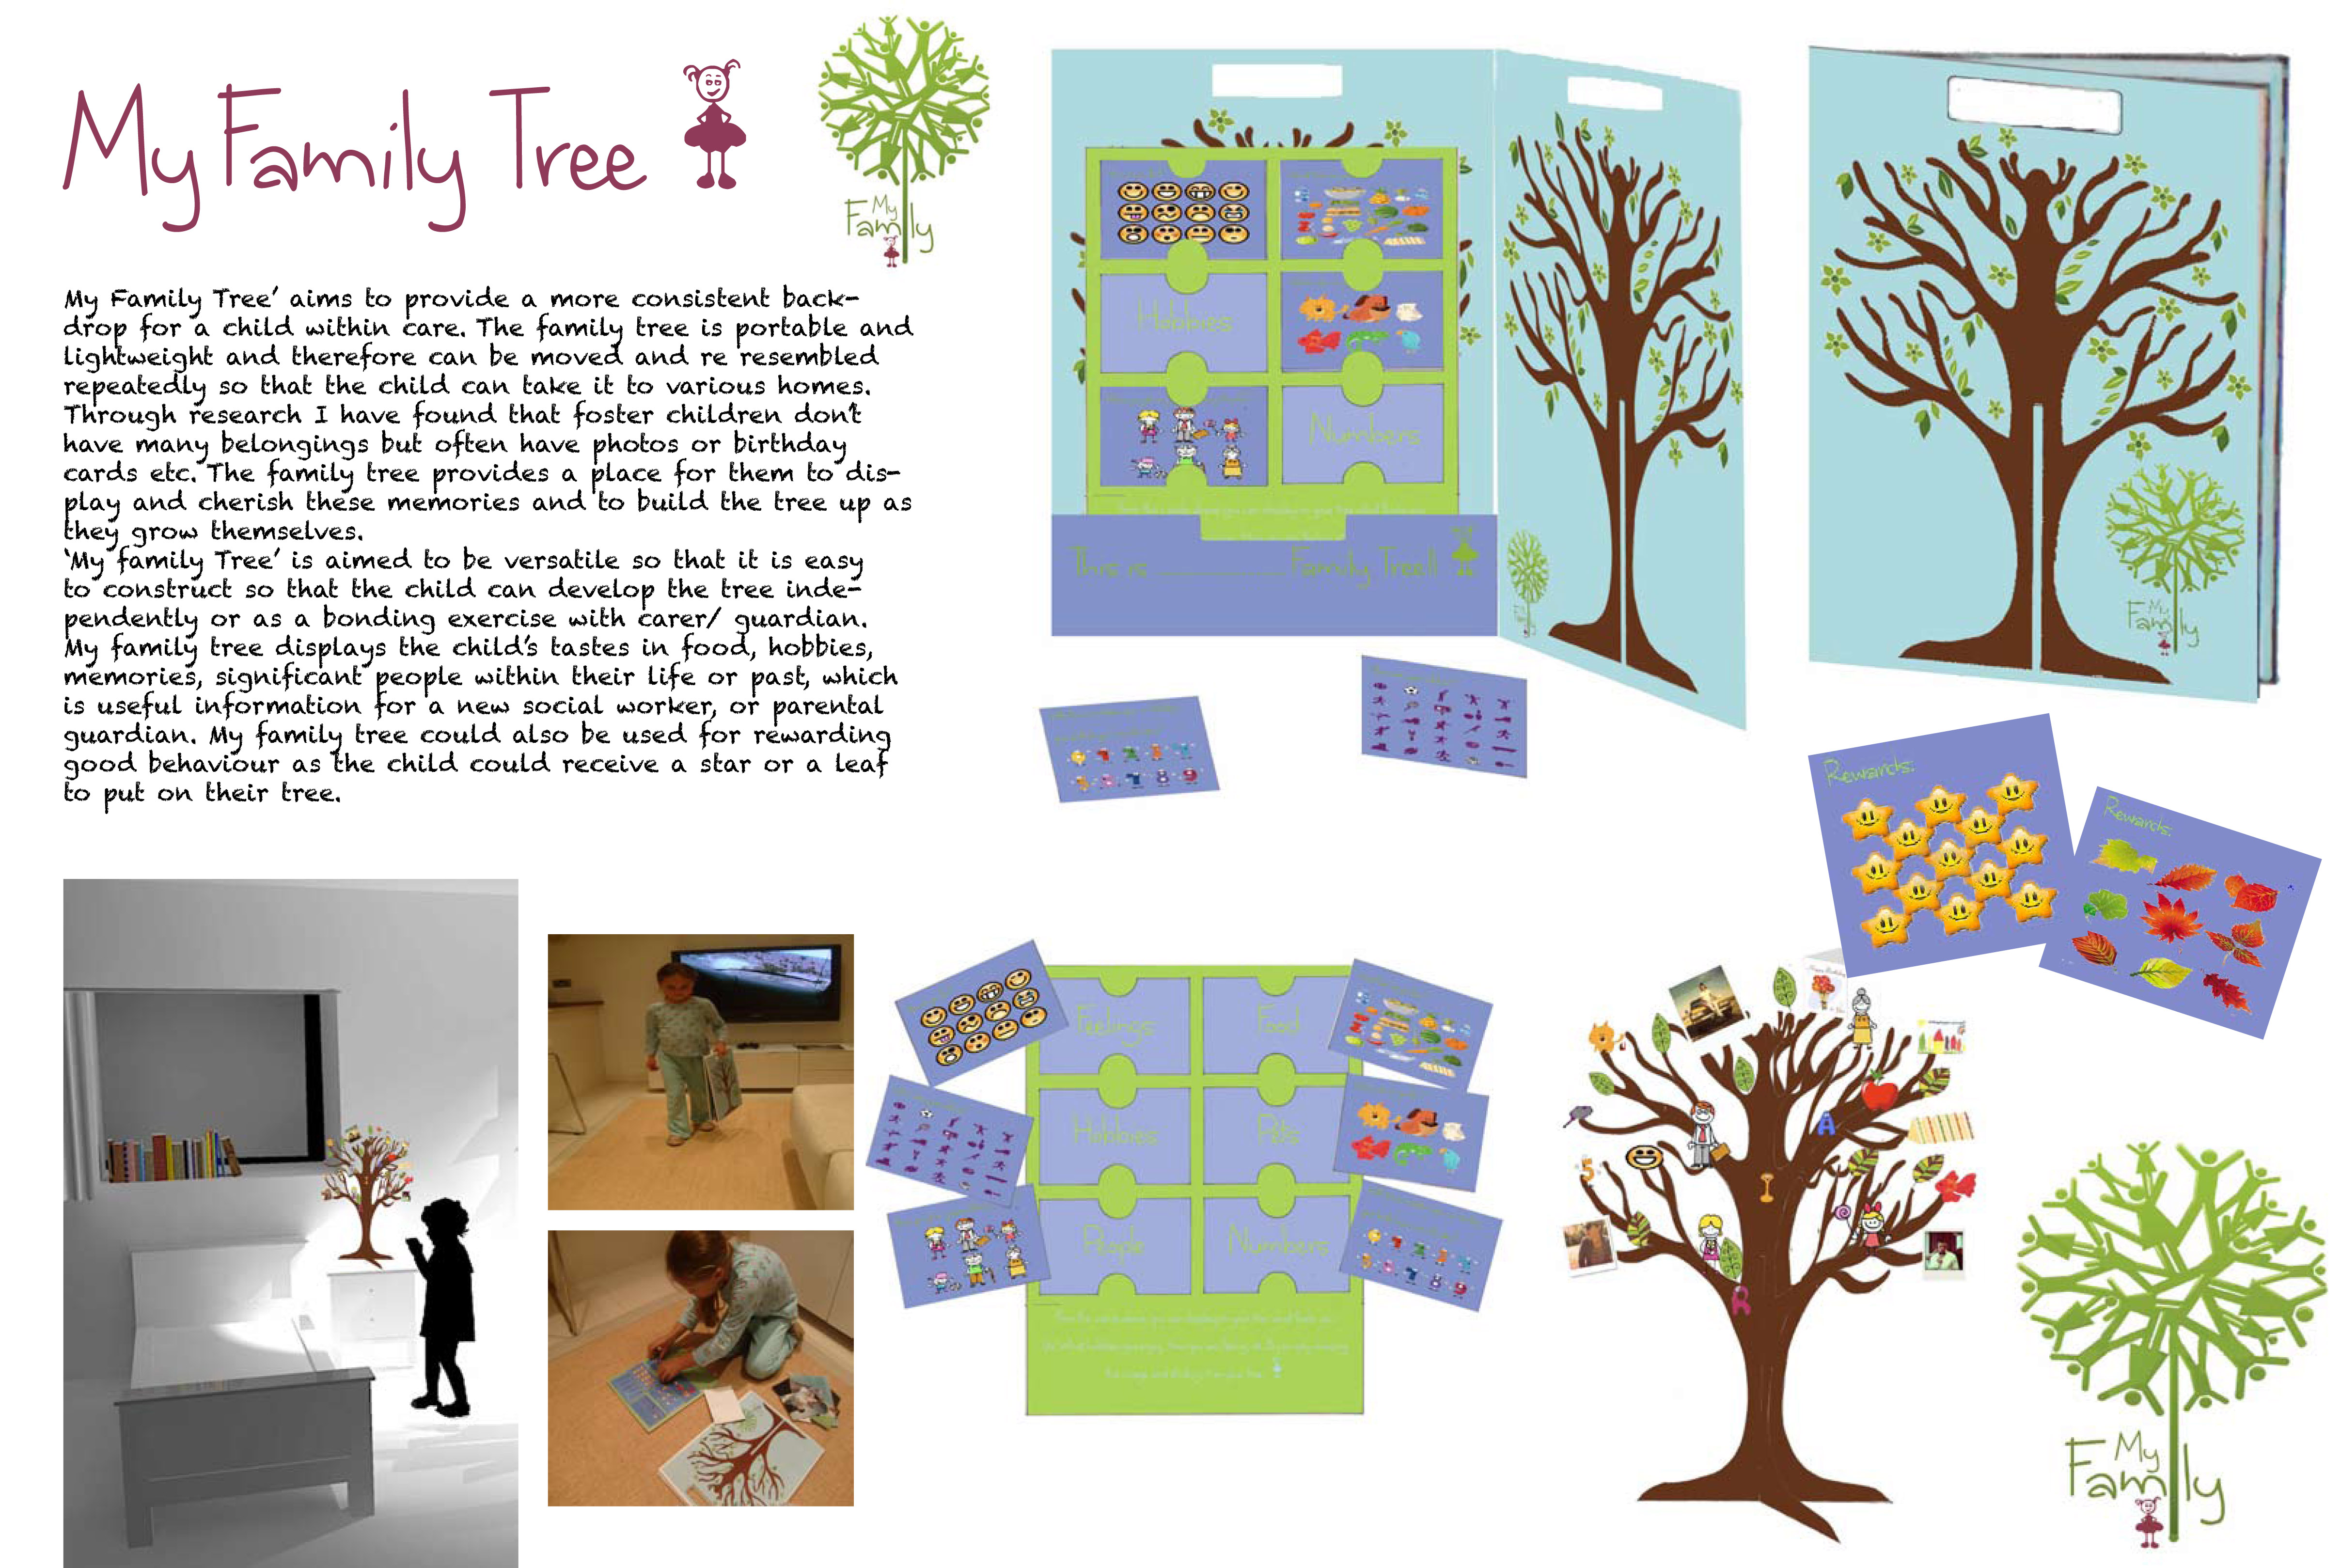 My Family Tree by Ria Parkinson of bwd